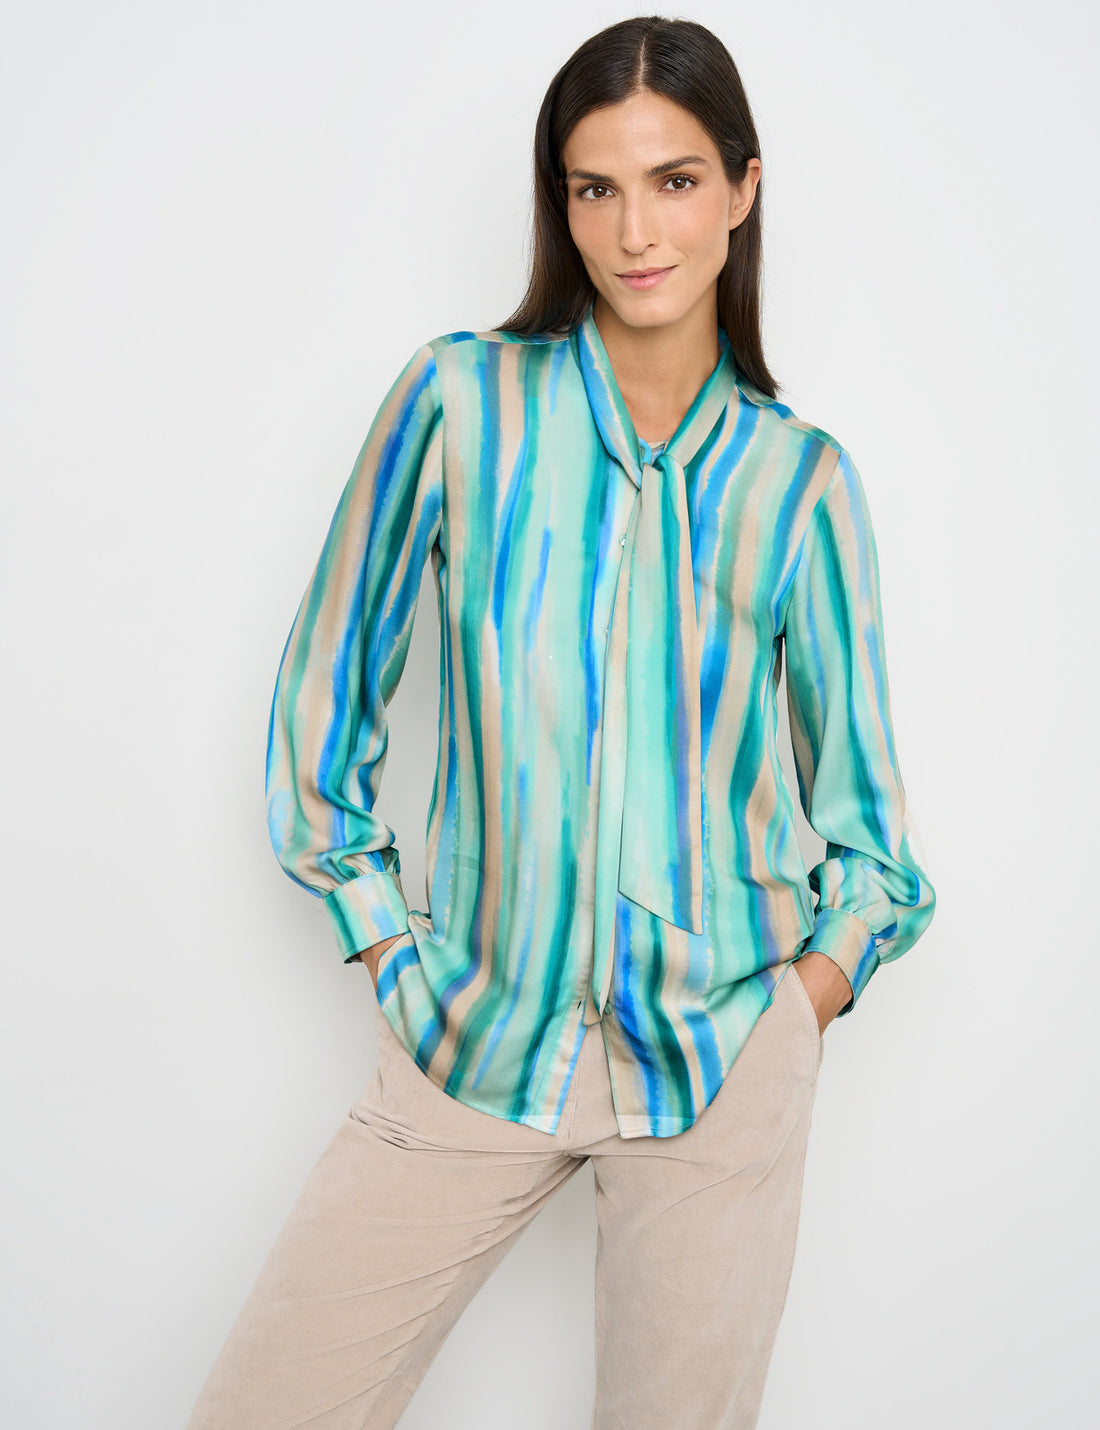 Flowing Blouse With A Bow Collar_160068-66456_5089_01